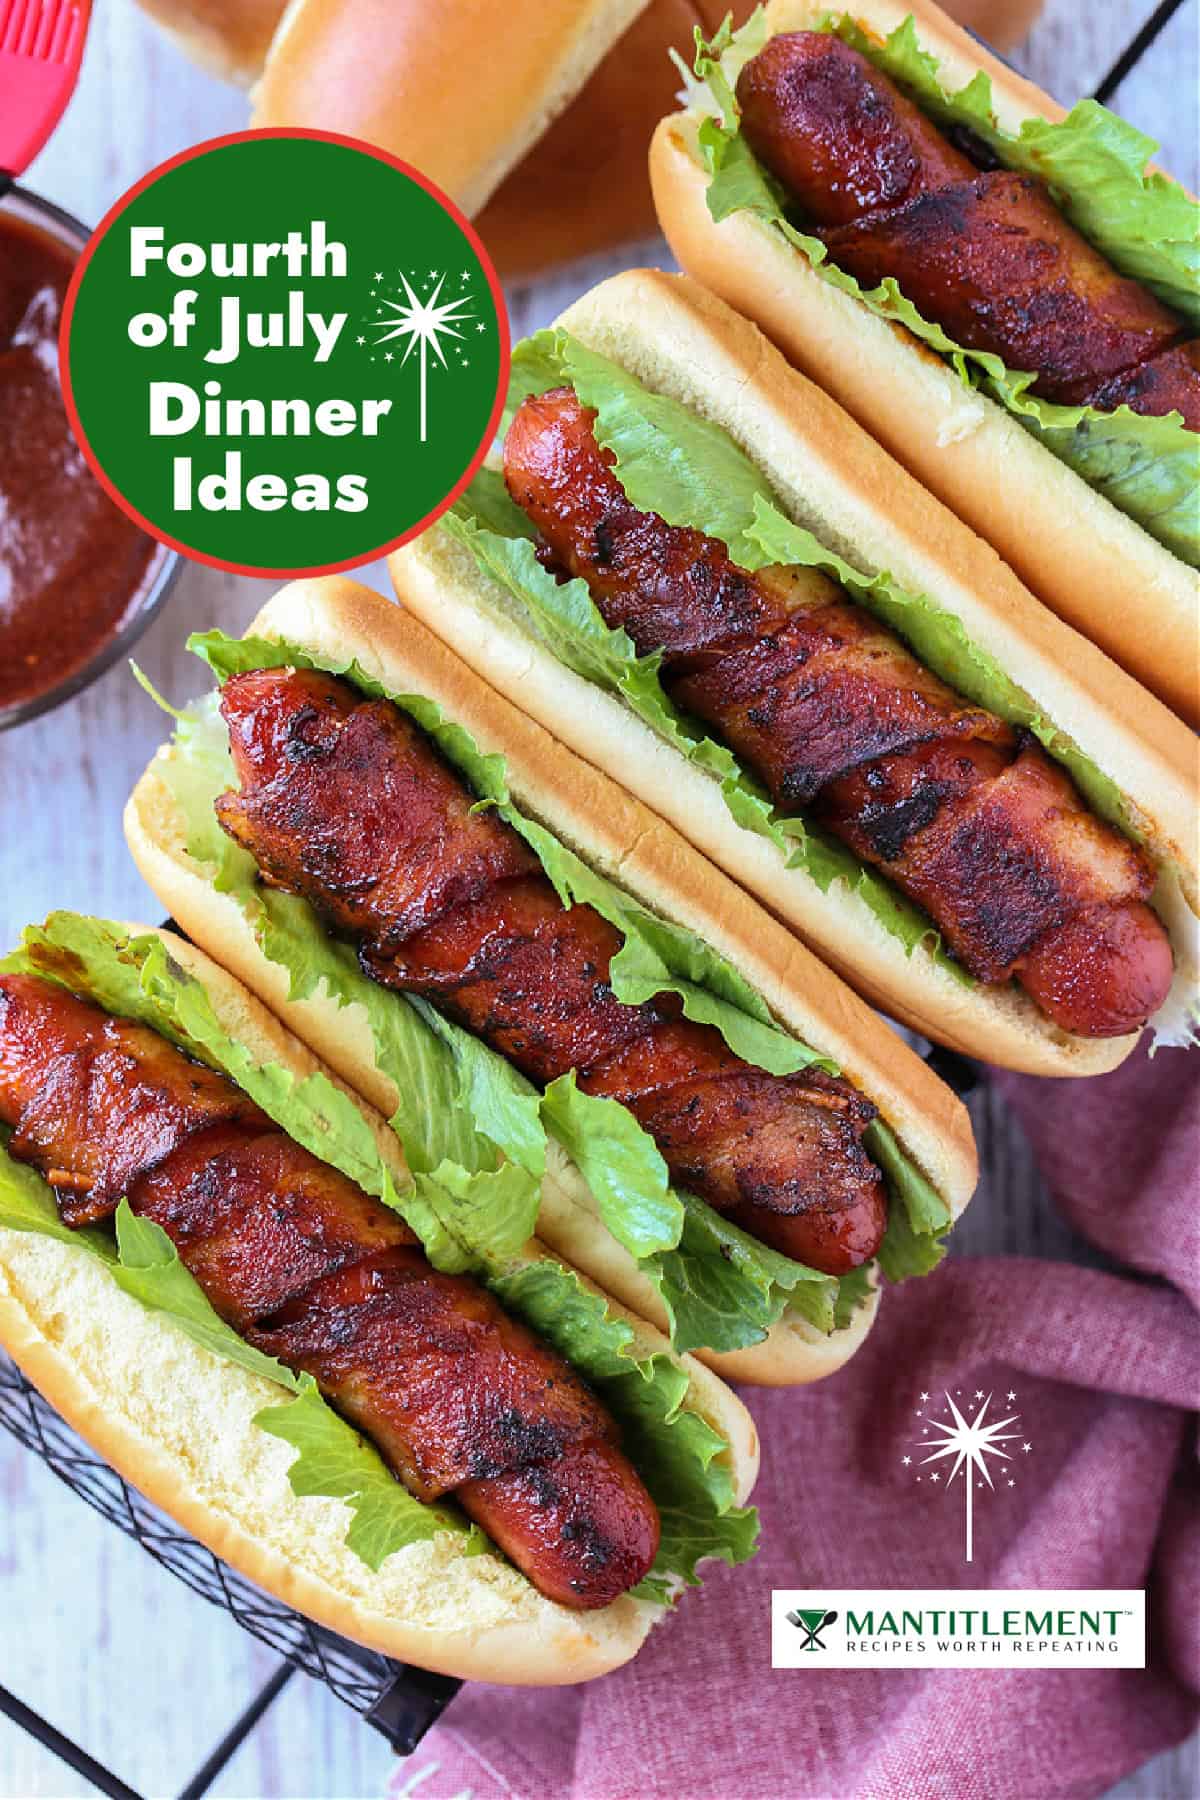 bacon wrapped hot dogs for a july fourth dinner idea